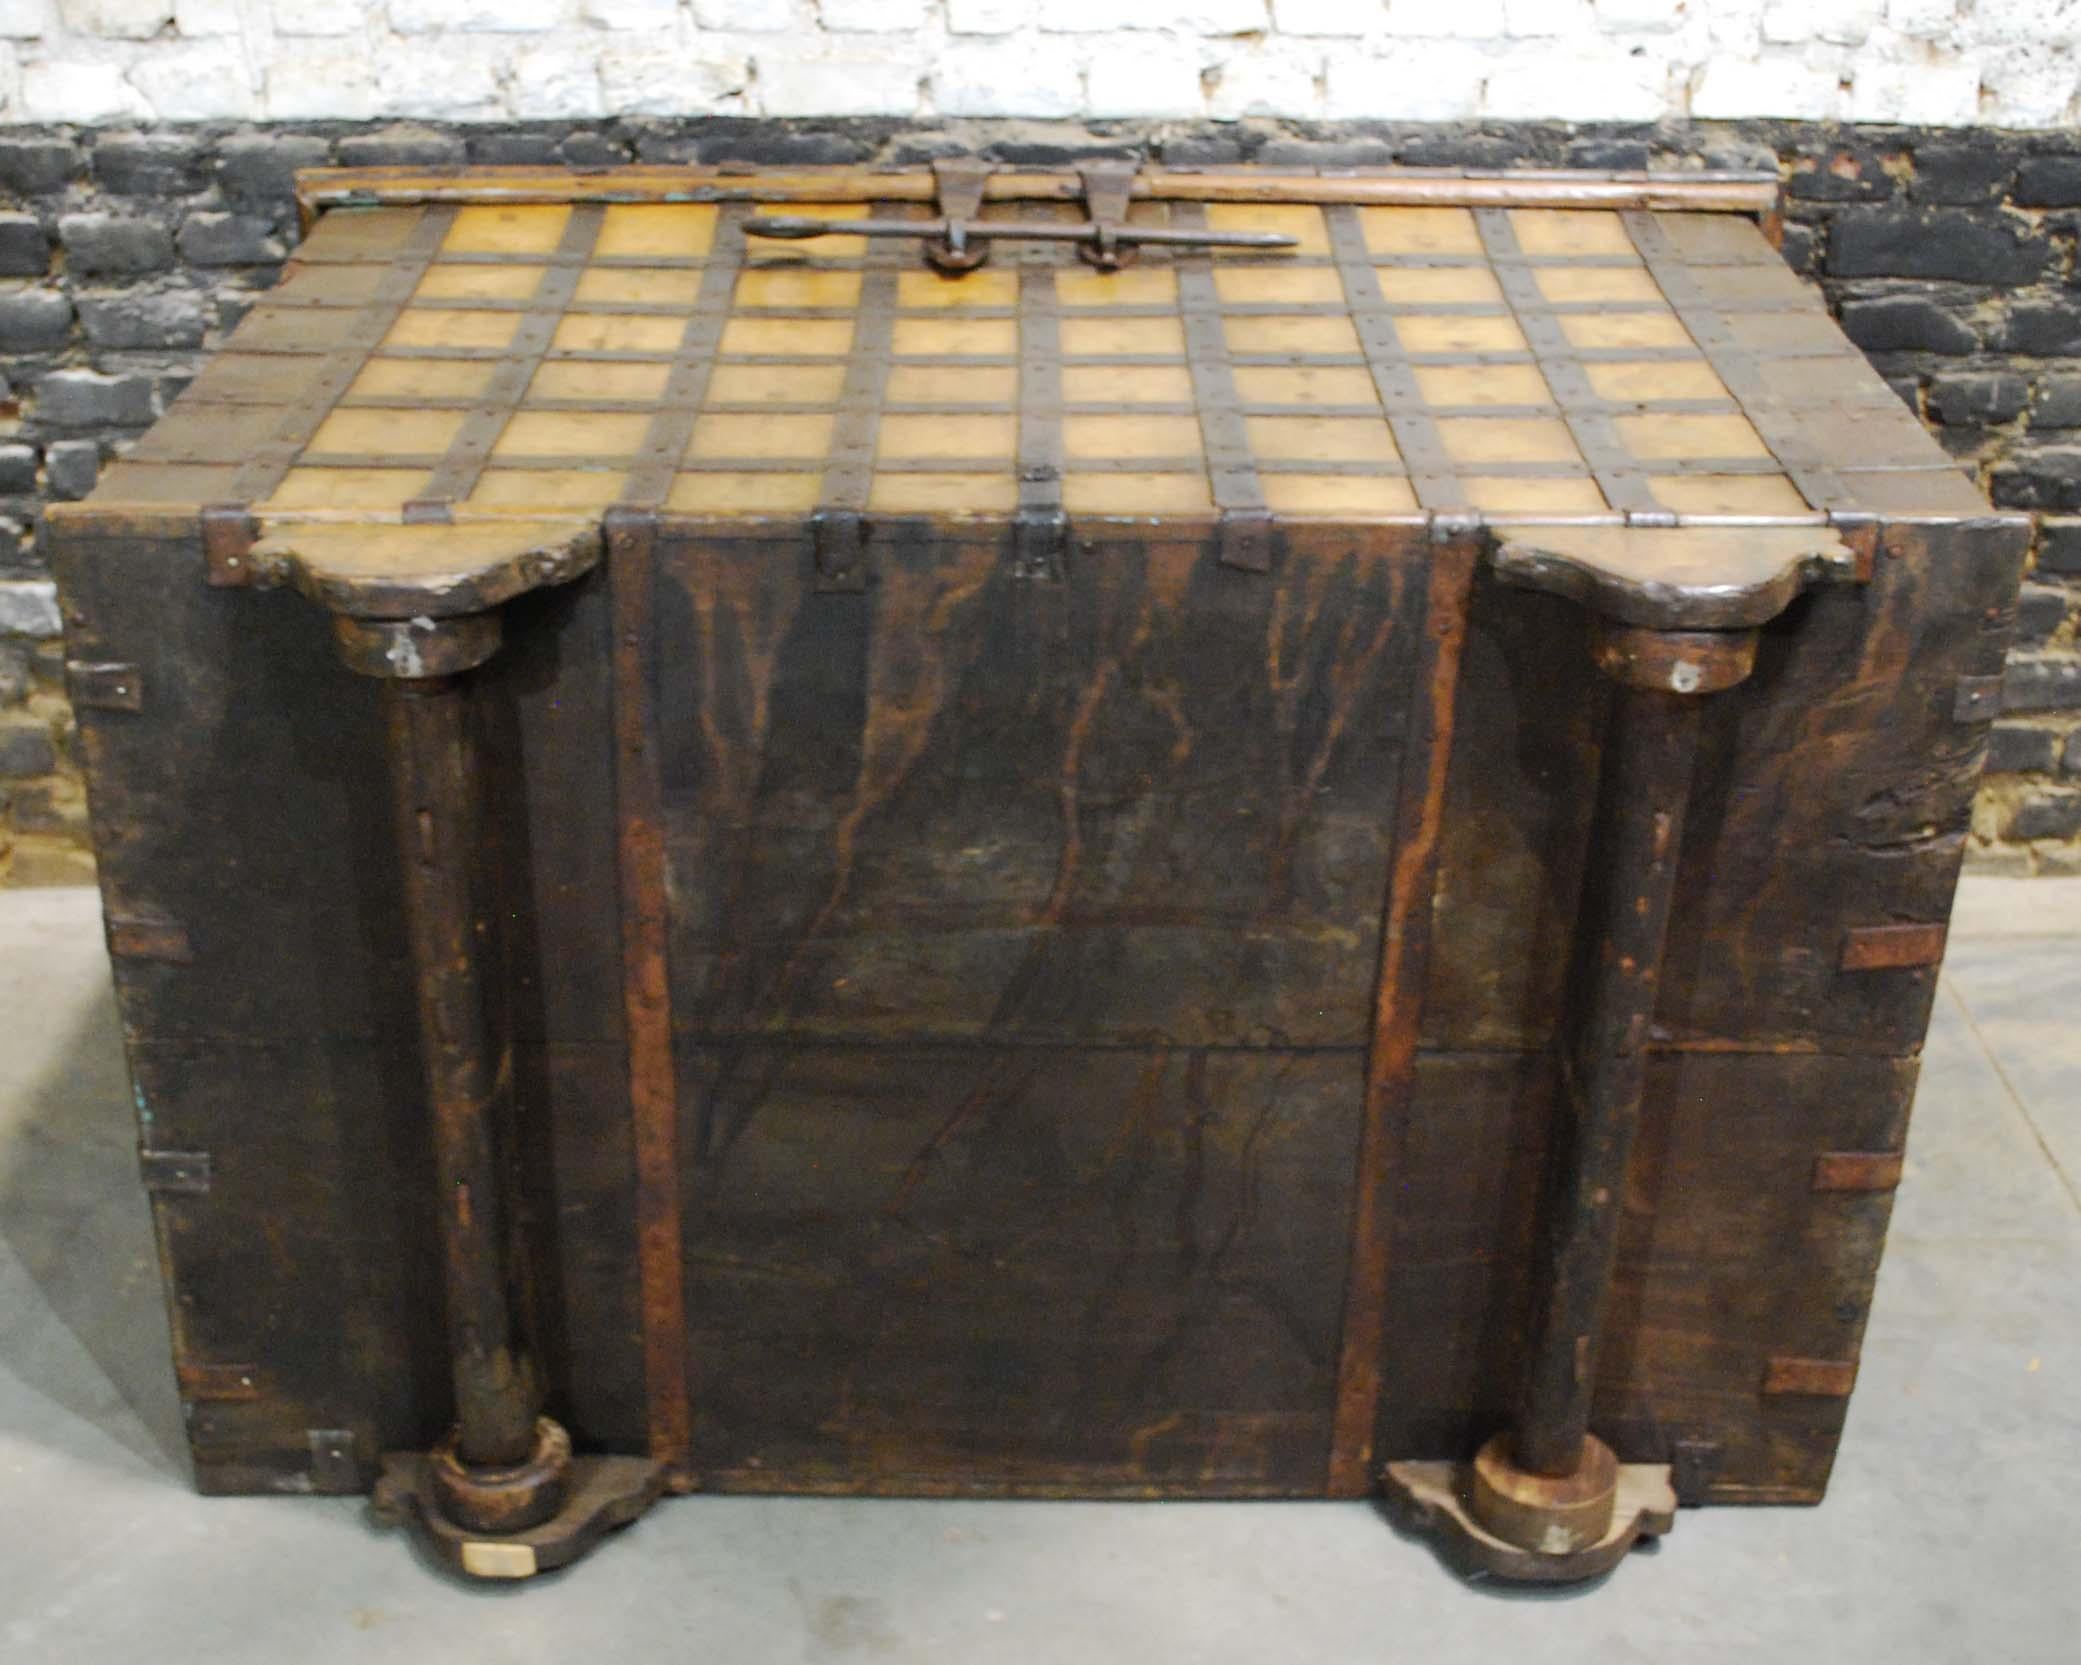 Antique 19th Century Anglo-Indian Haveli Trunk with Iron-Clad Fittings For Sale 12